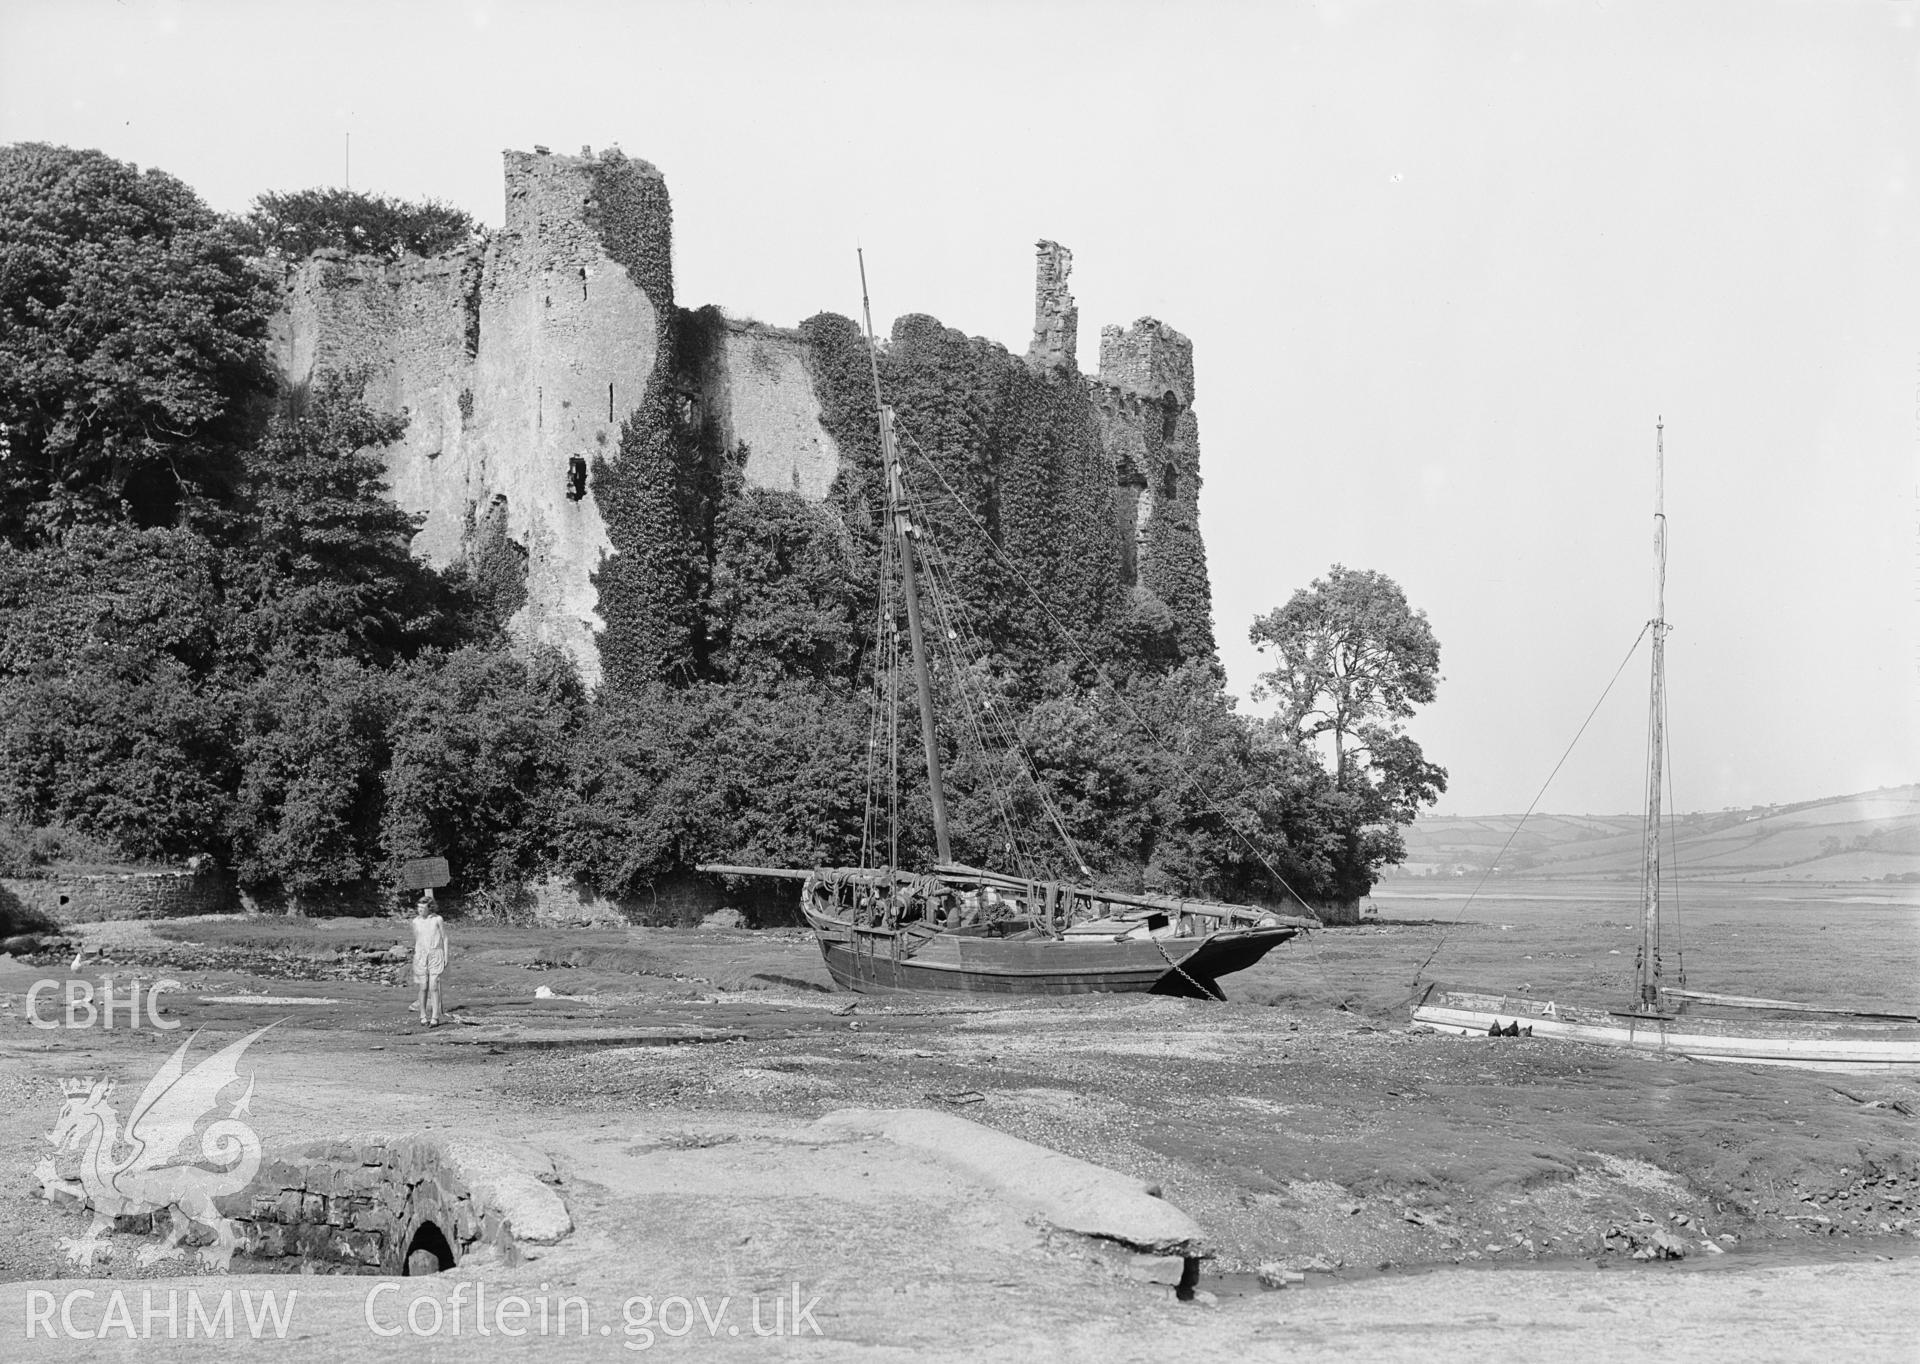 View of Laugharne Castle with boats moored in foreground.